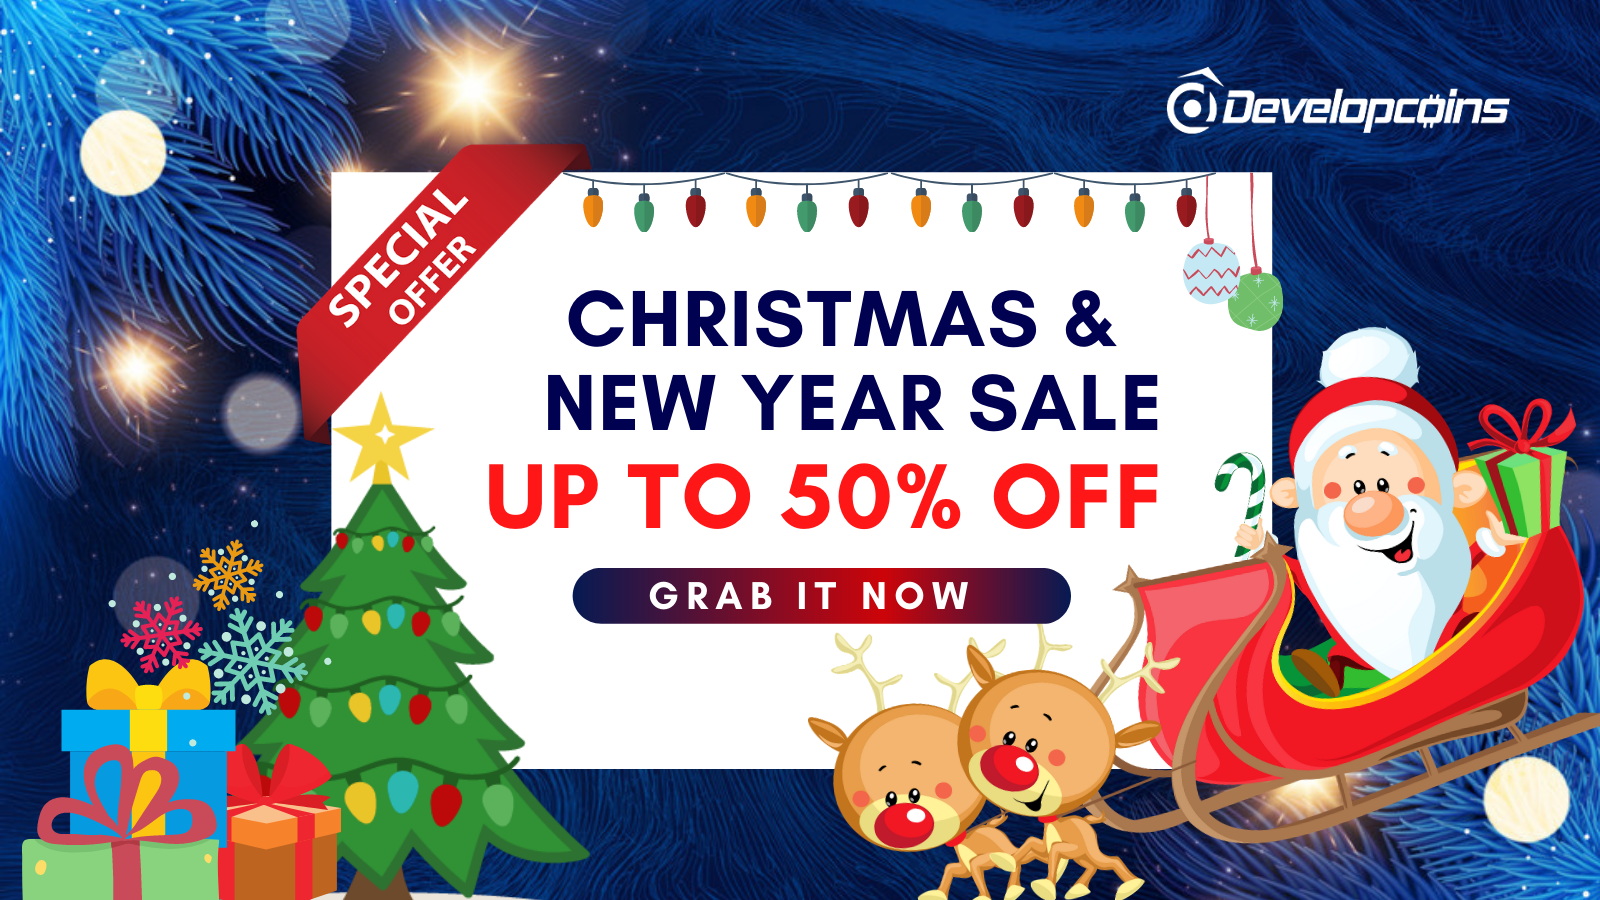 Grab Exclusive Christmas And New Year Super Sale Offers from Developcoins!